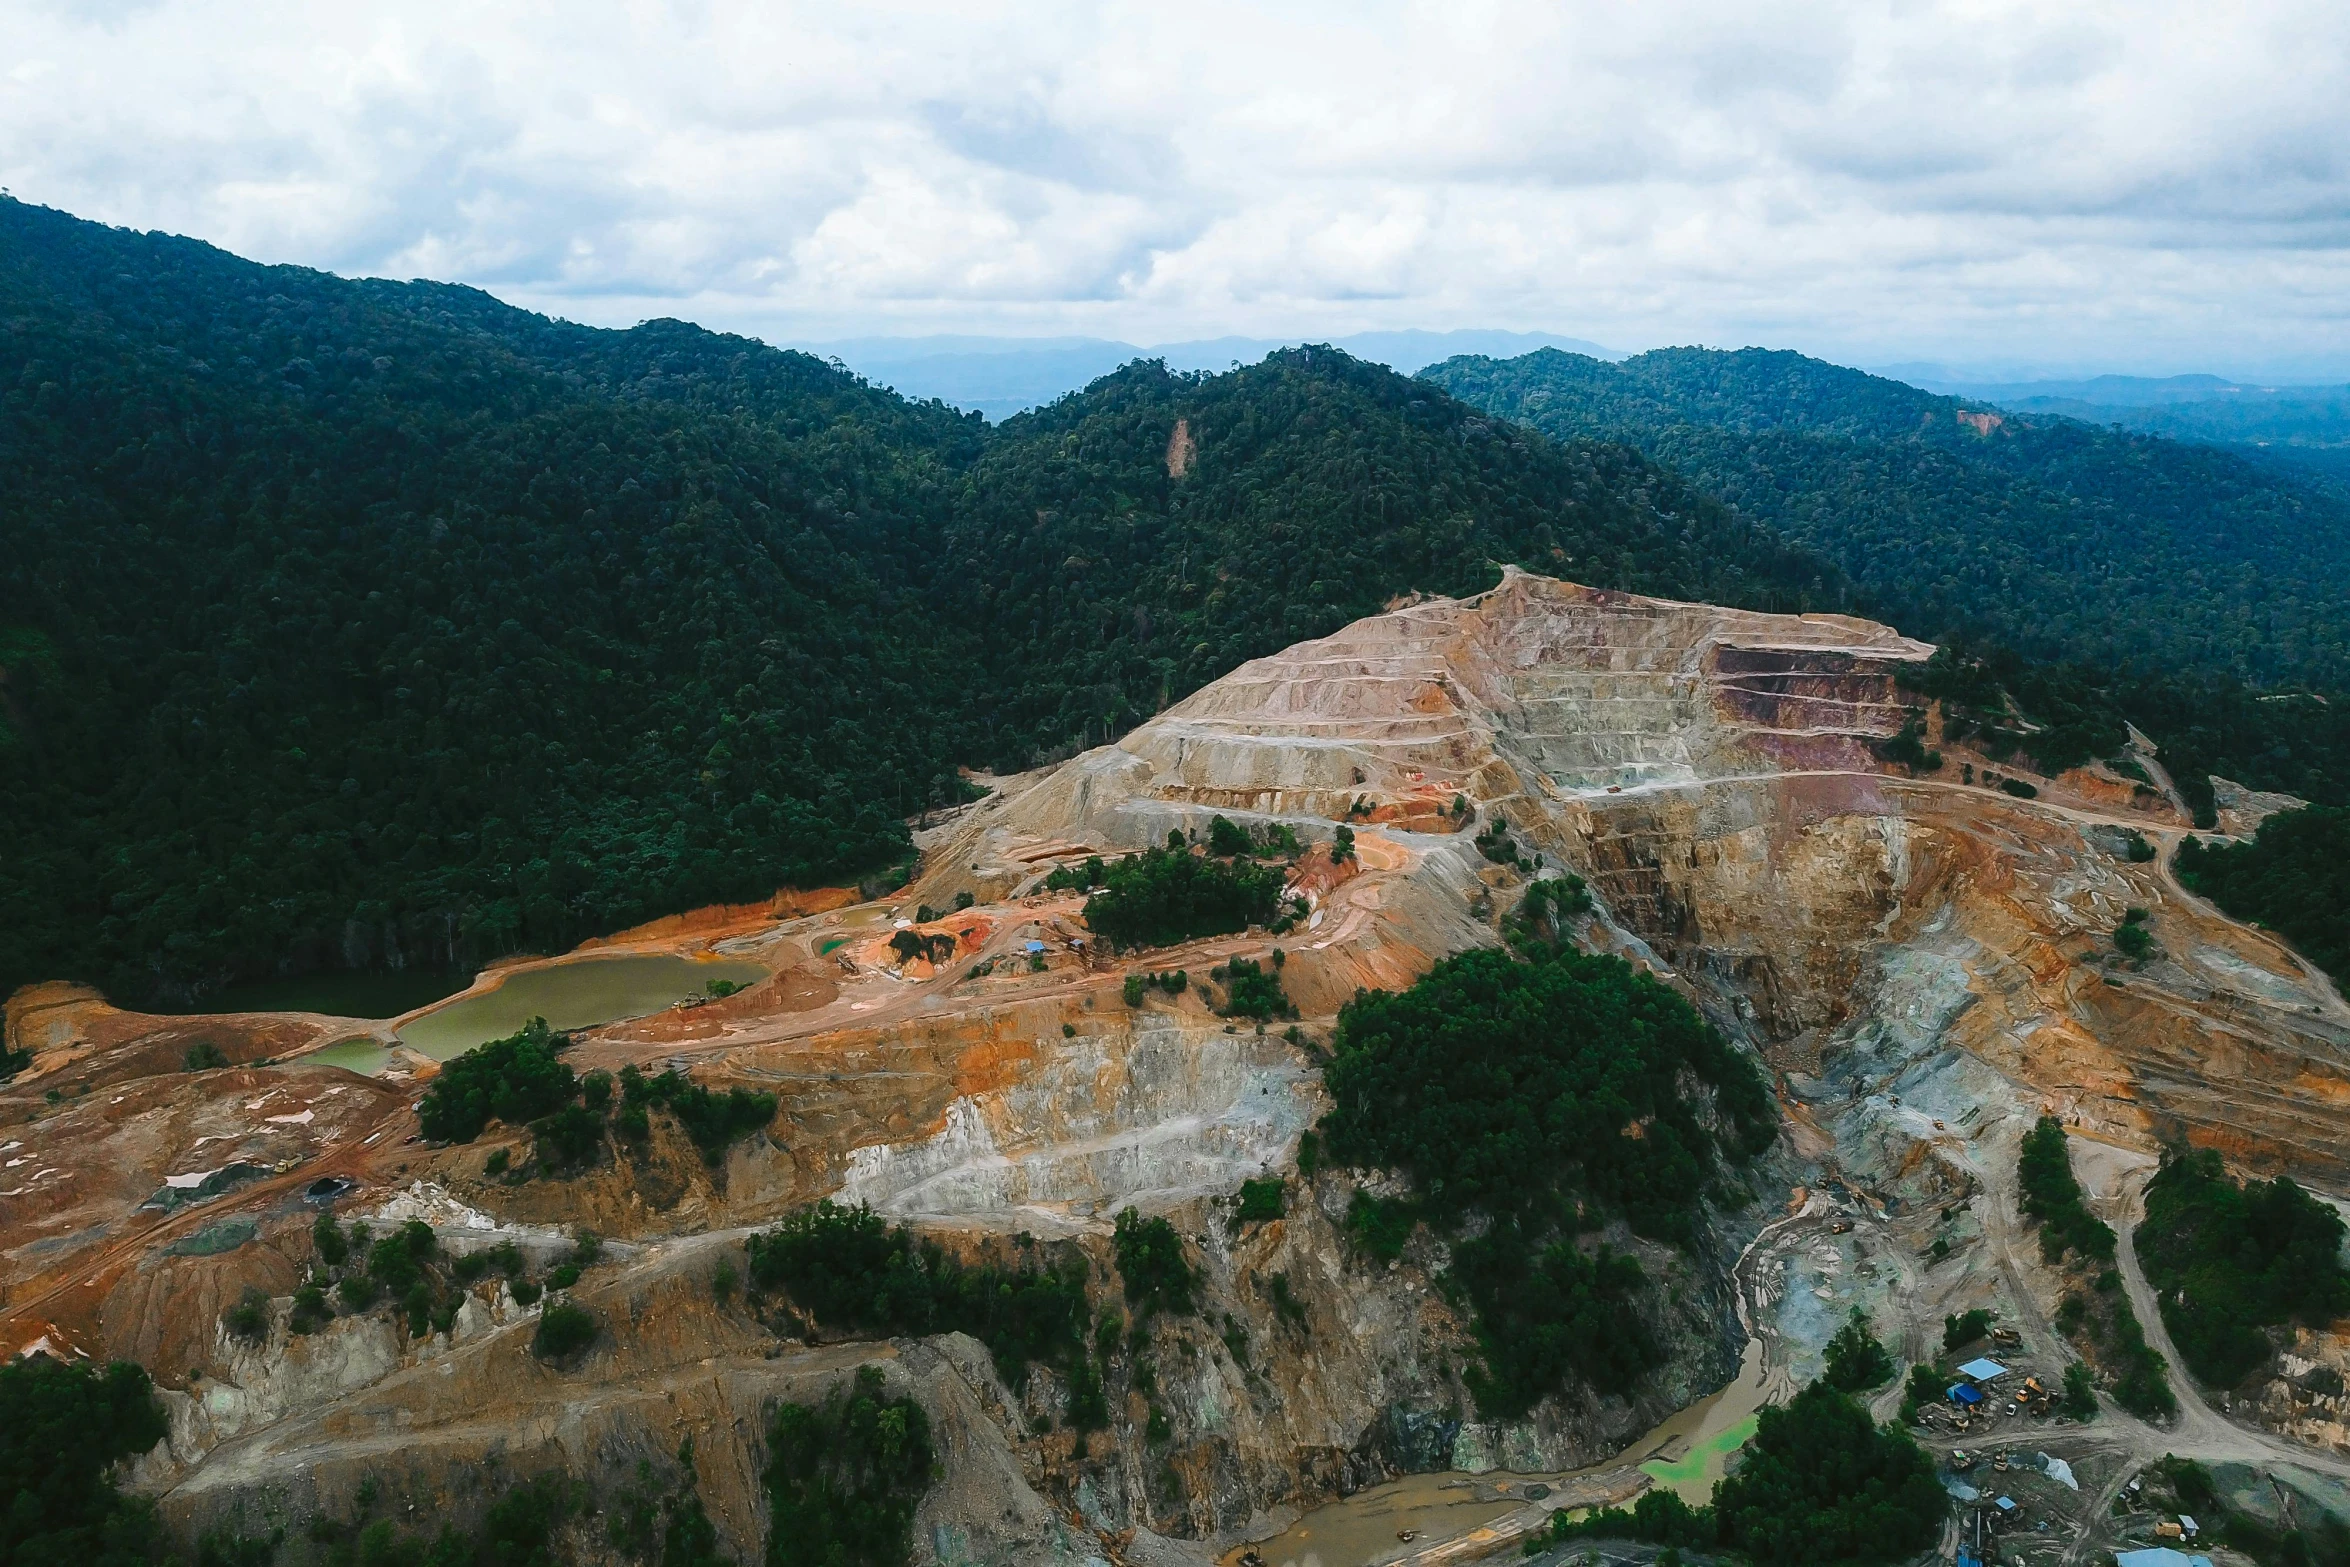 the view of a massive area of an open air pit